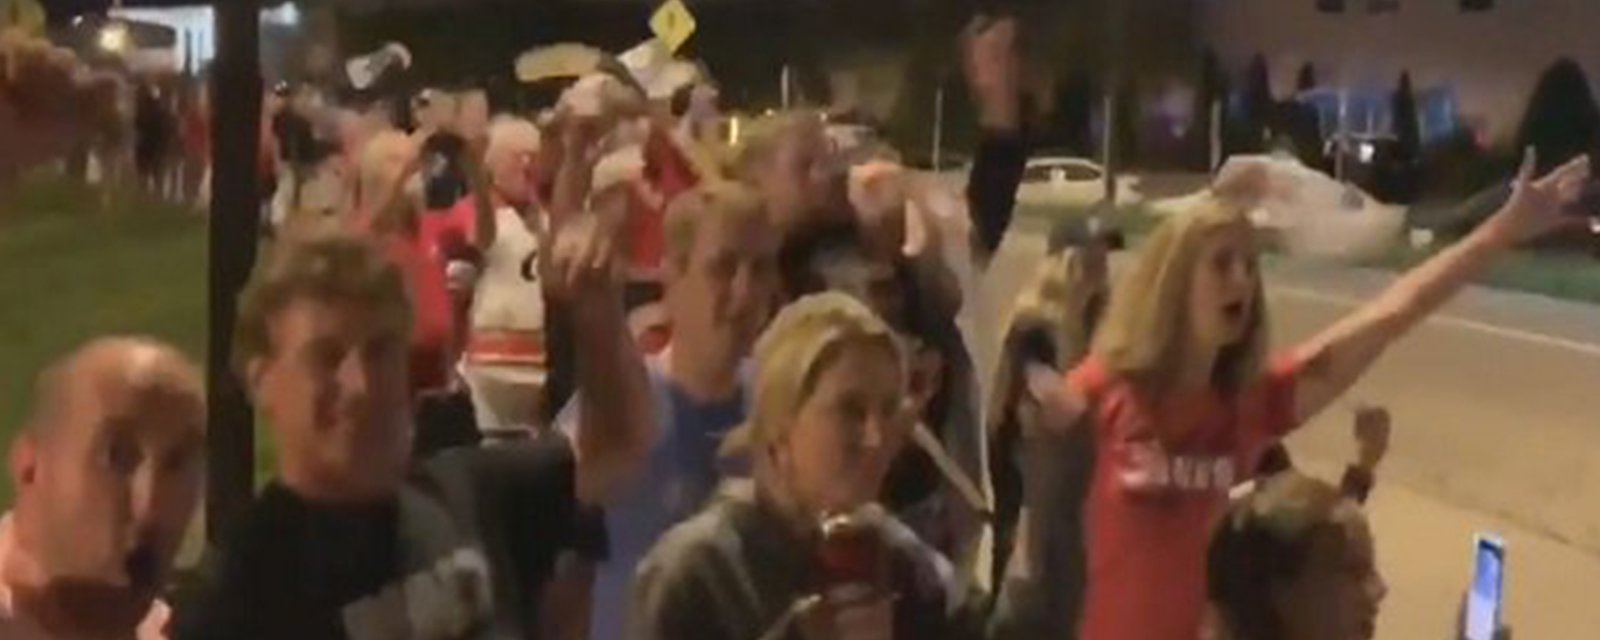 Hurricanes fans gather at airport to welcome team home after Game 2 win in New York